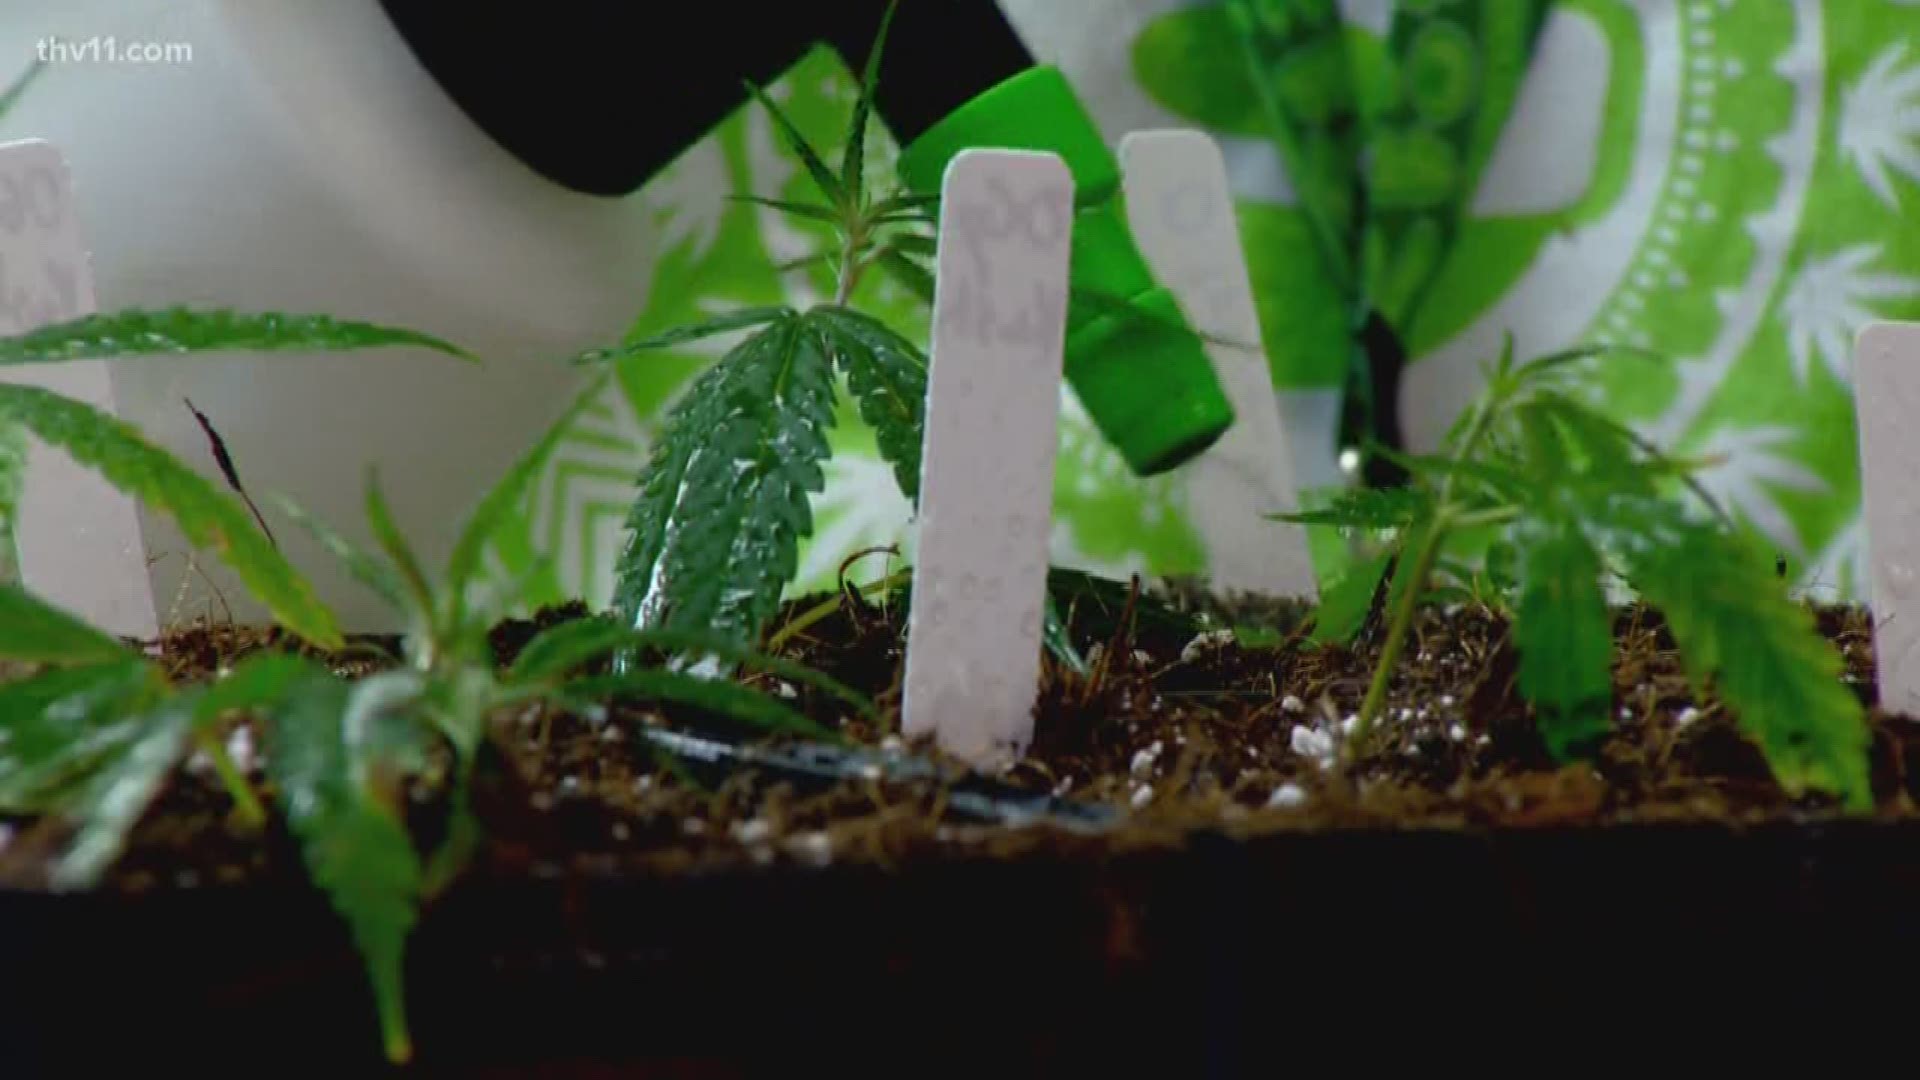 People in Cotton Plant reached out to THV11 with concerns over the application process to work in a new medical marijuana cultivation facility.